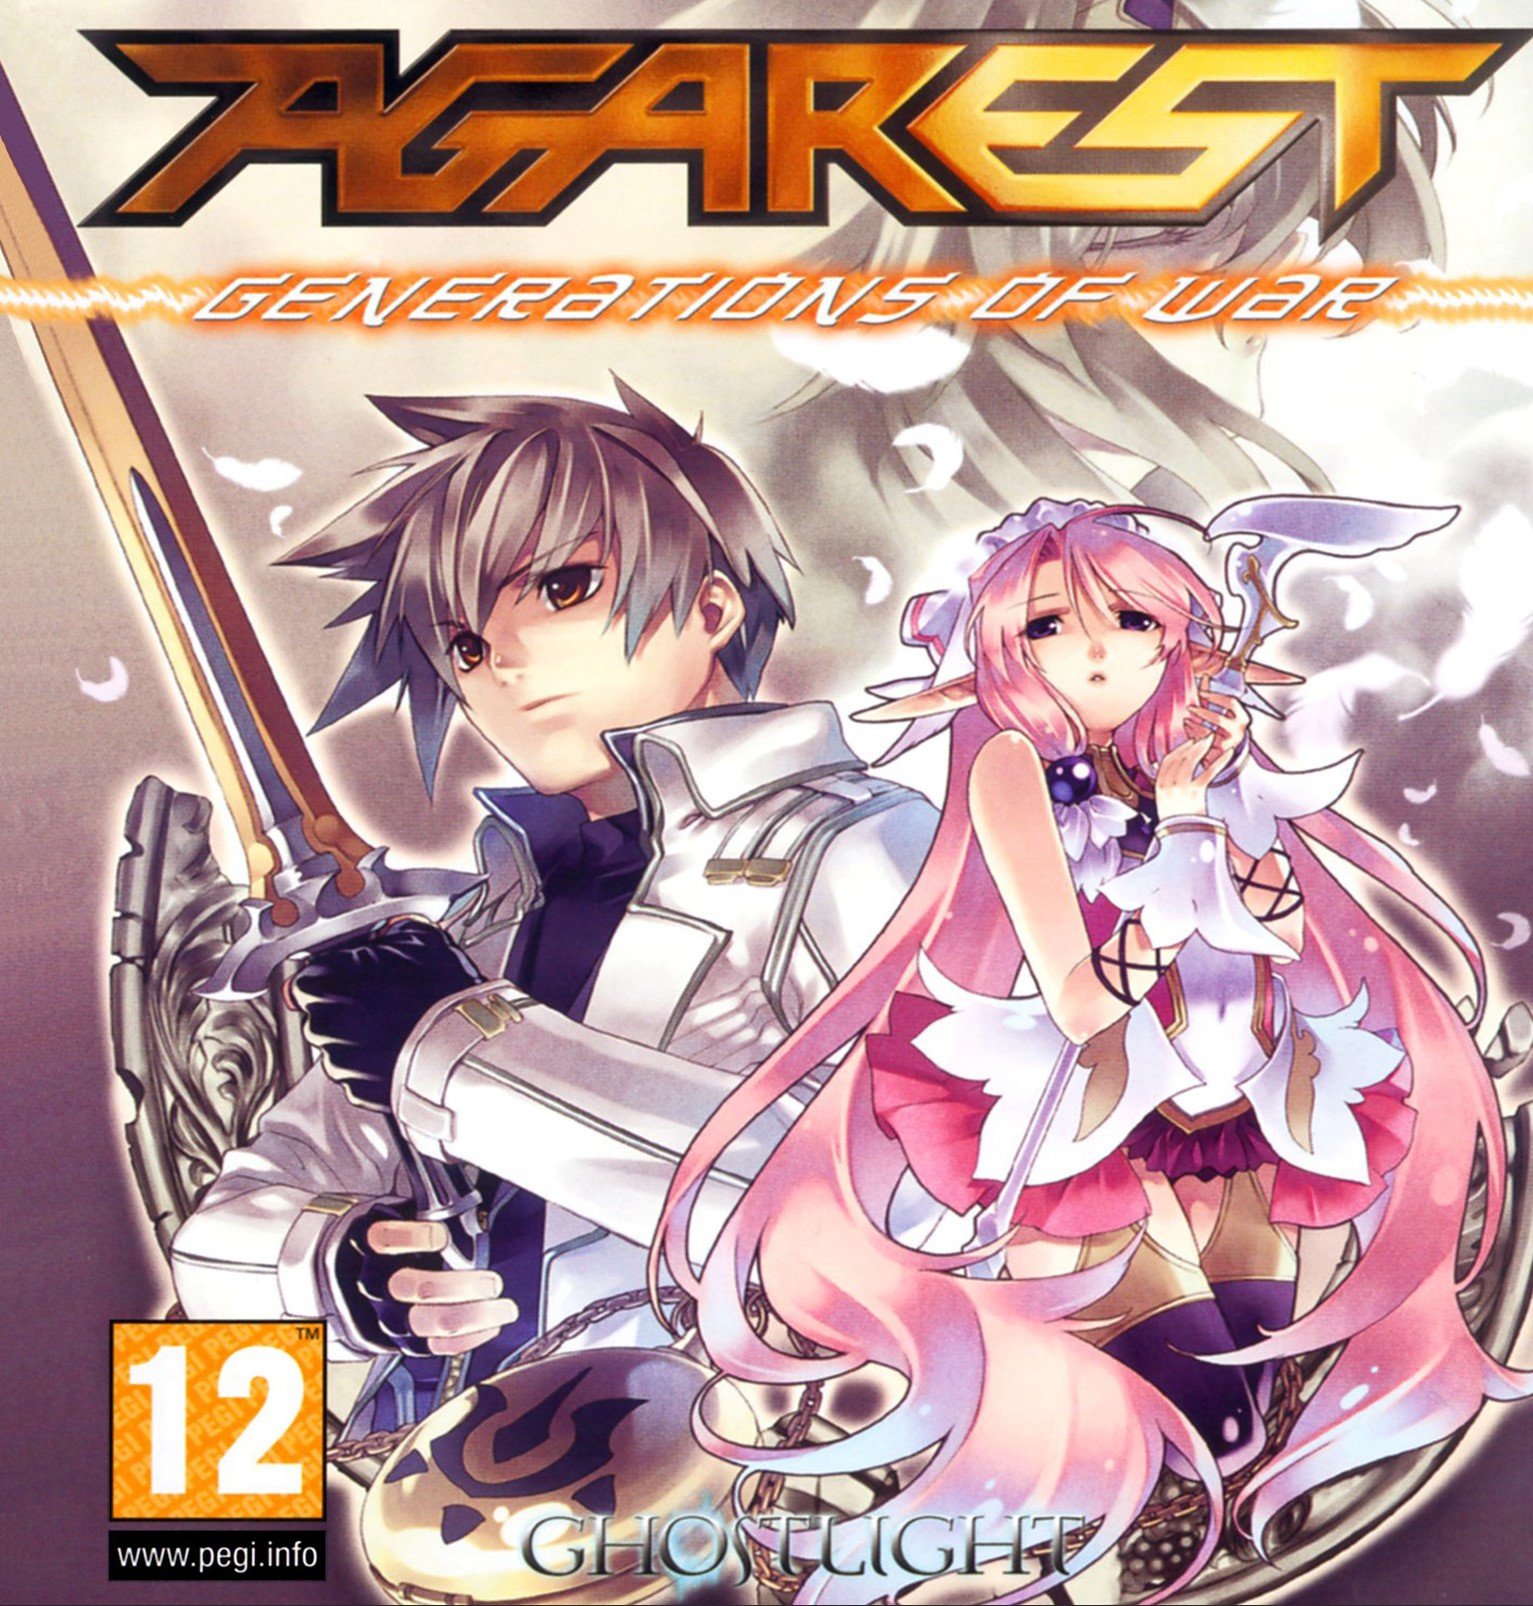 Image of Agarest: Generations of War